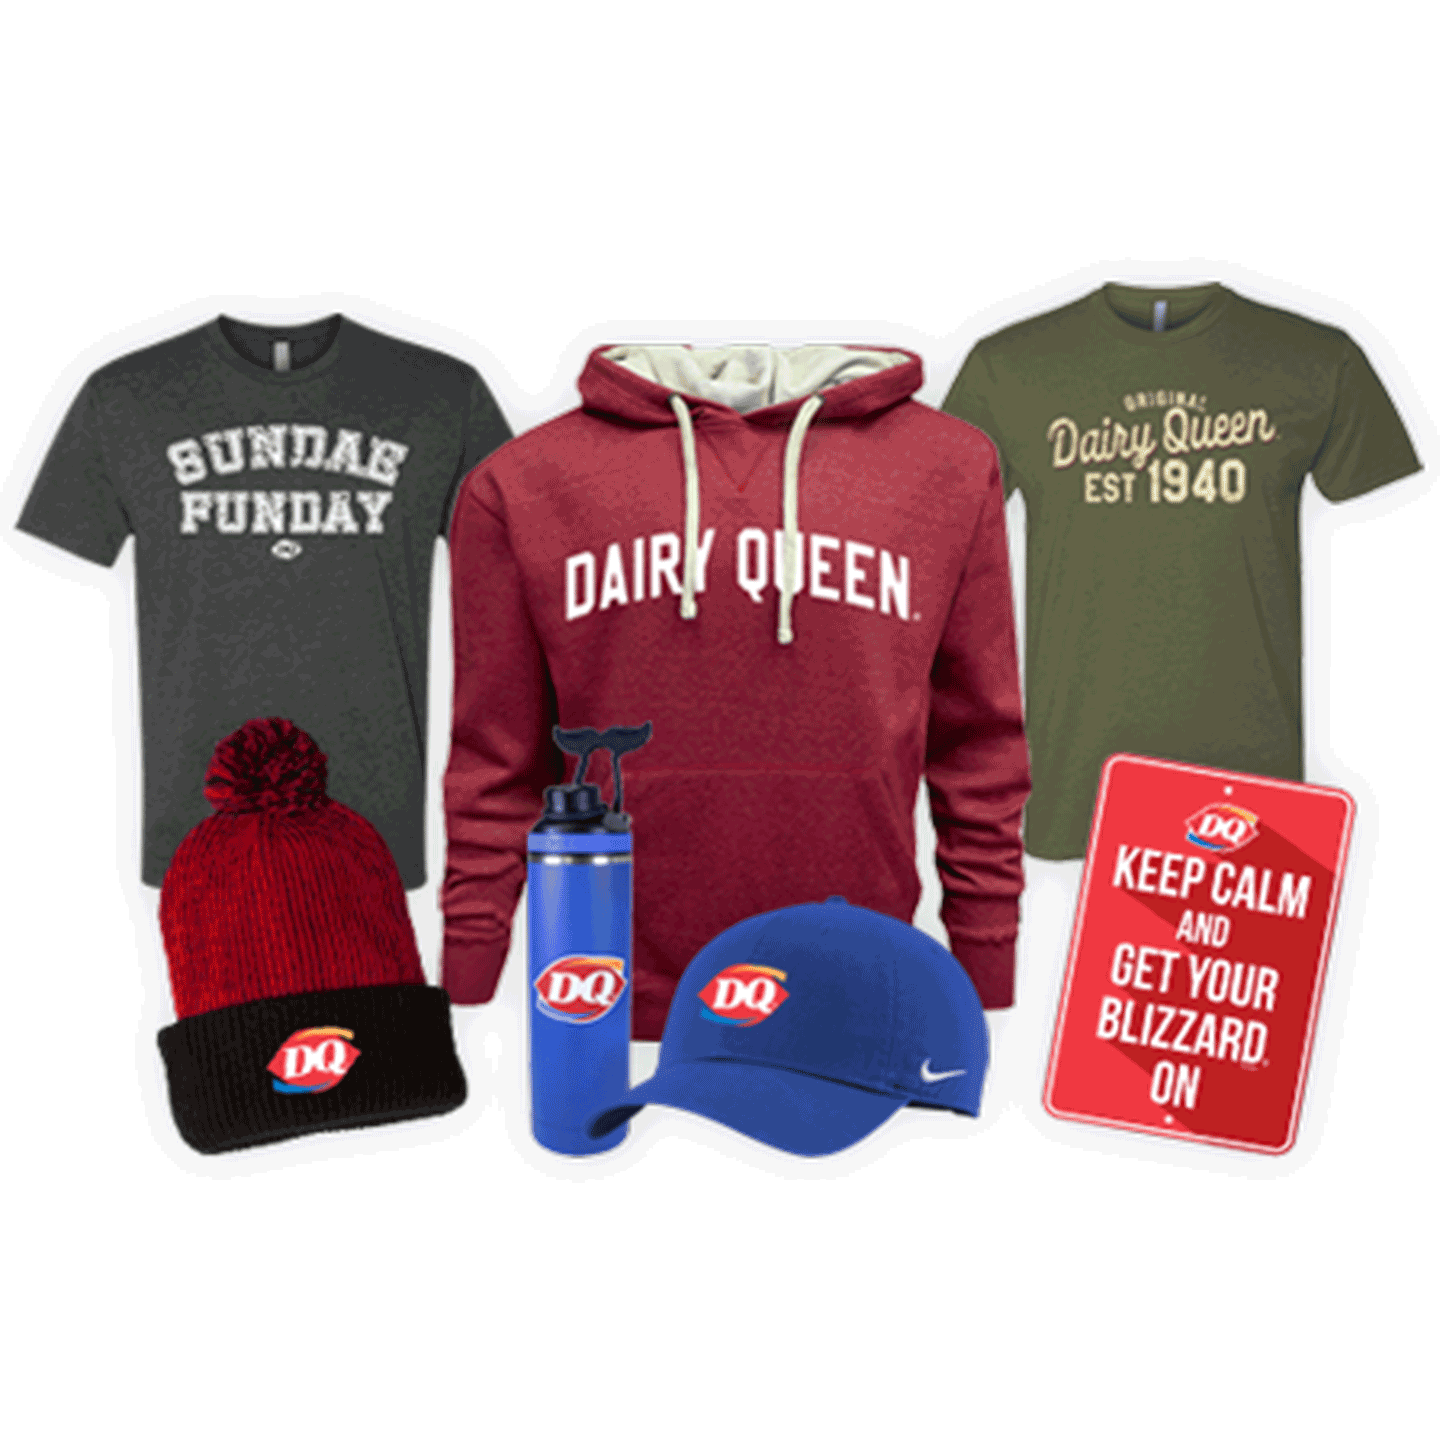 DQ T-shirts, hat, and shoe gear